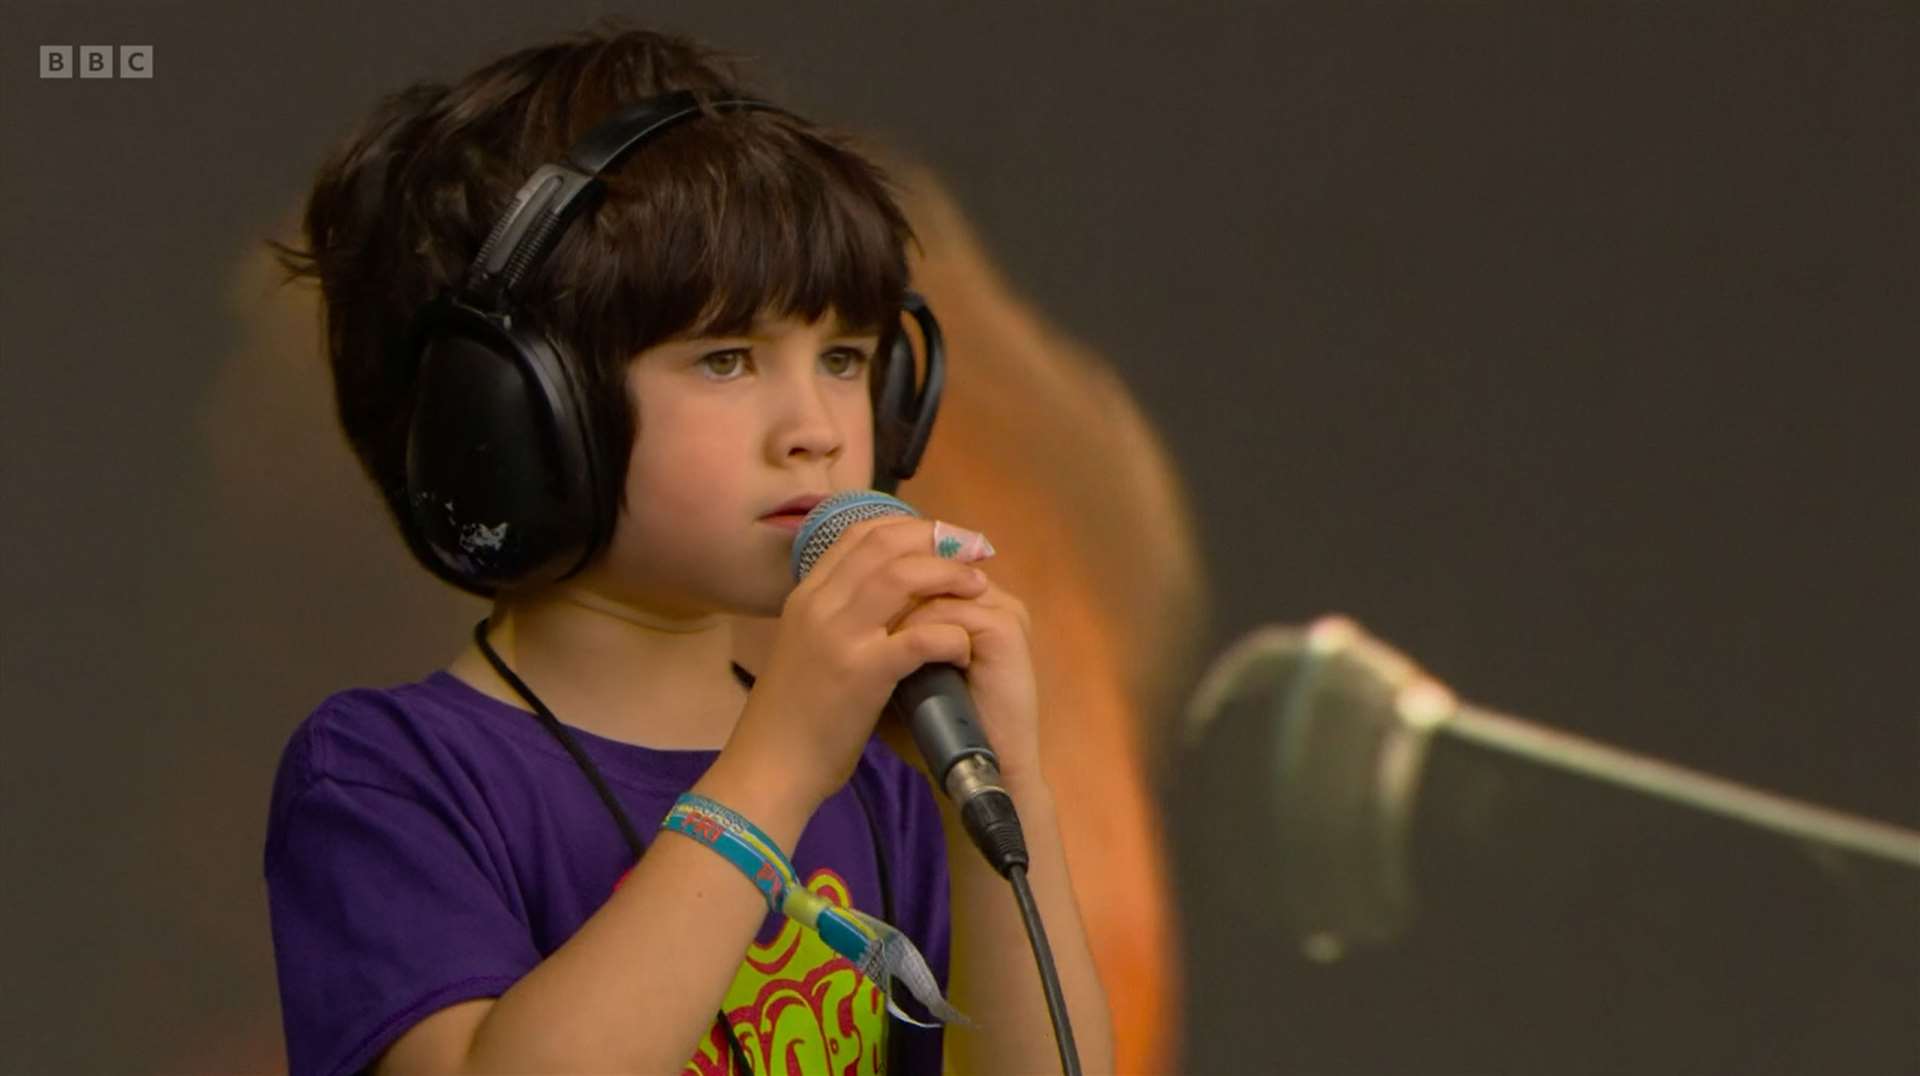 The young performer had his name chanted by thousands while on stage (BBC/PA)